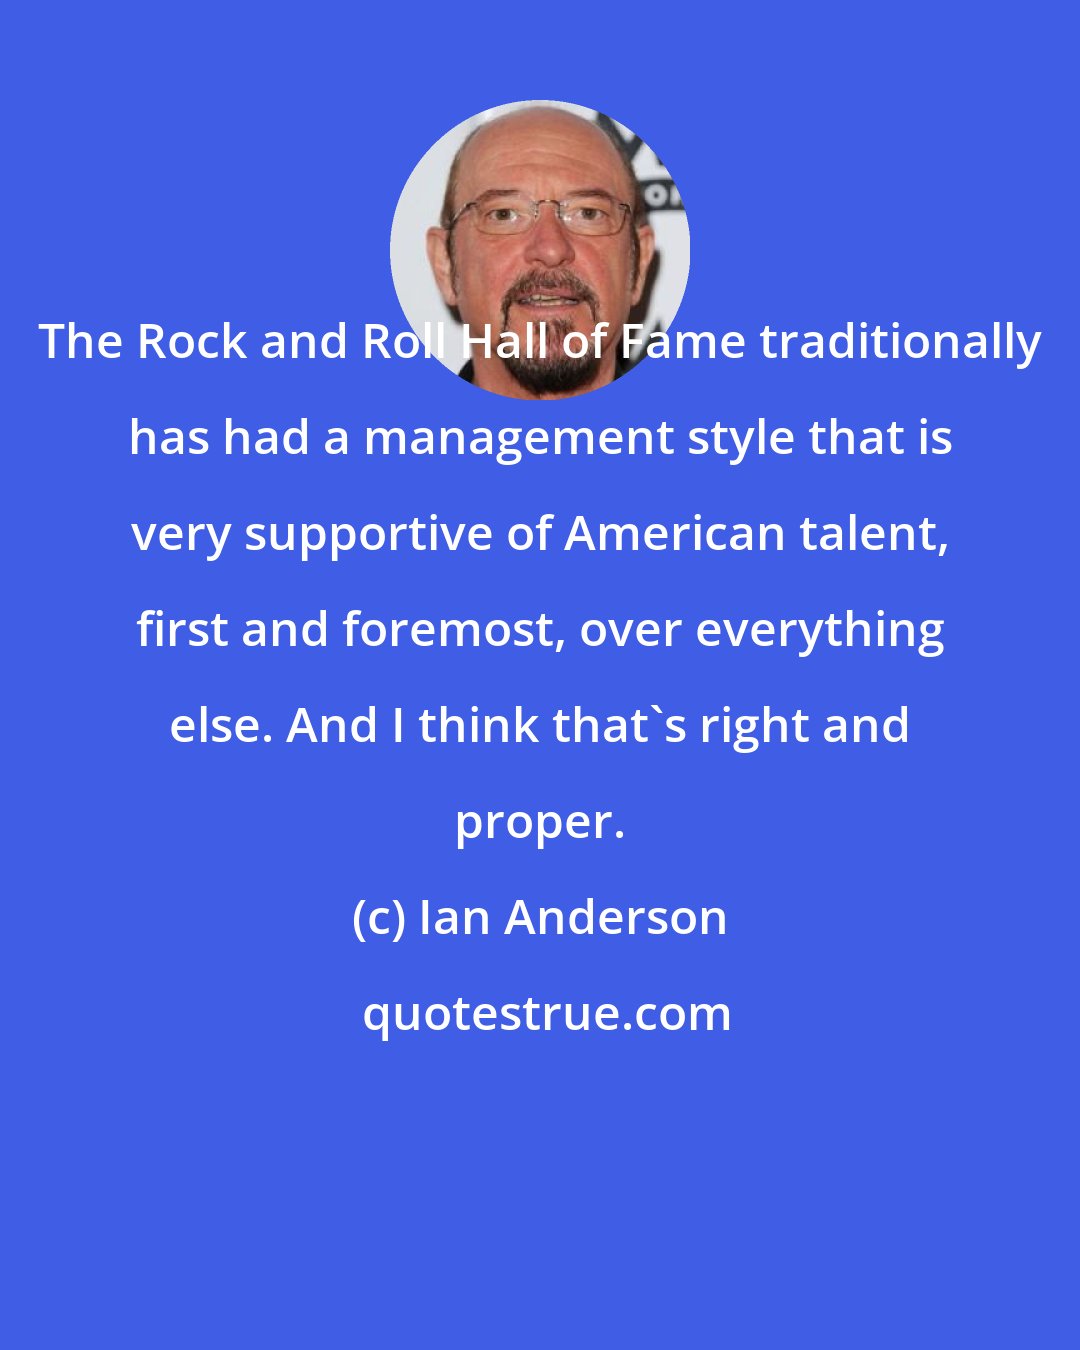 Ian Anderson: The Rock and Roll Hall of Fame traditionally has had a management style that is very supportive of American talent, first and foremost, over everything else. And I think that's right and proper.